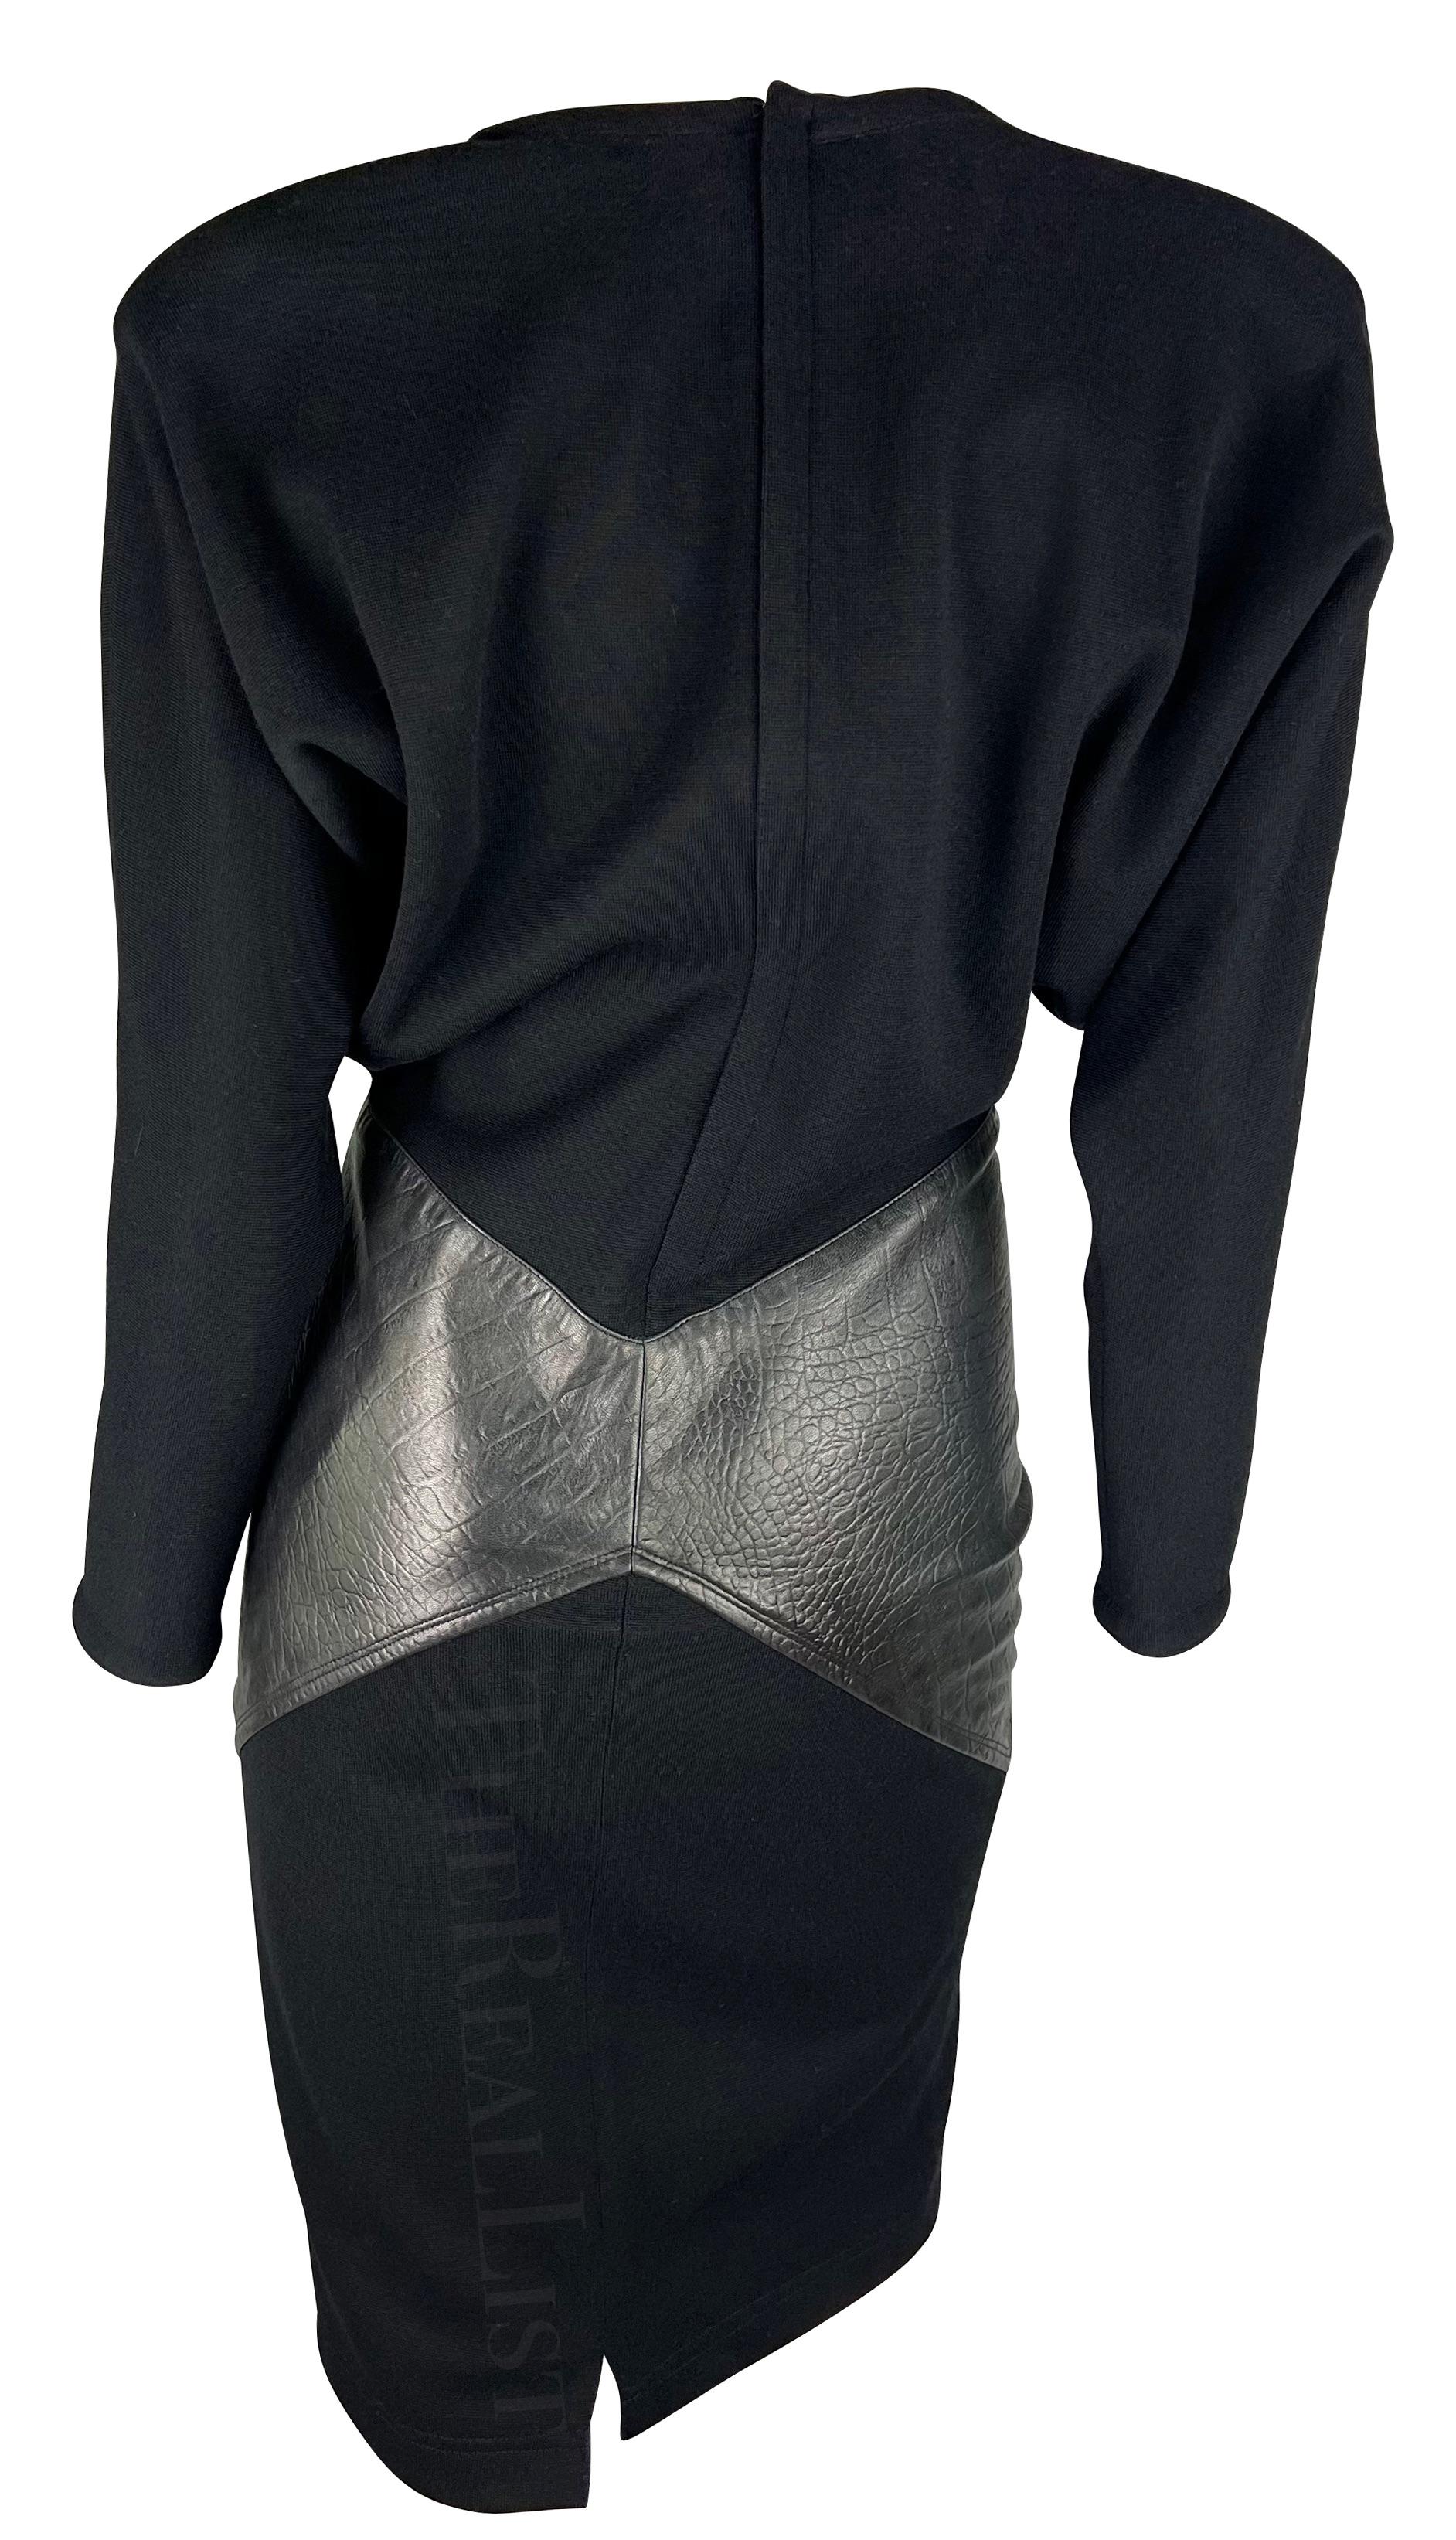 Women's 1980s Gianni Versace Stretch Knit Embossed Leather Hip Tie Black Wool Dress For Sale